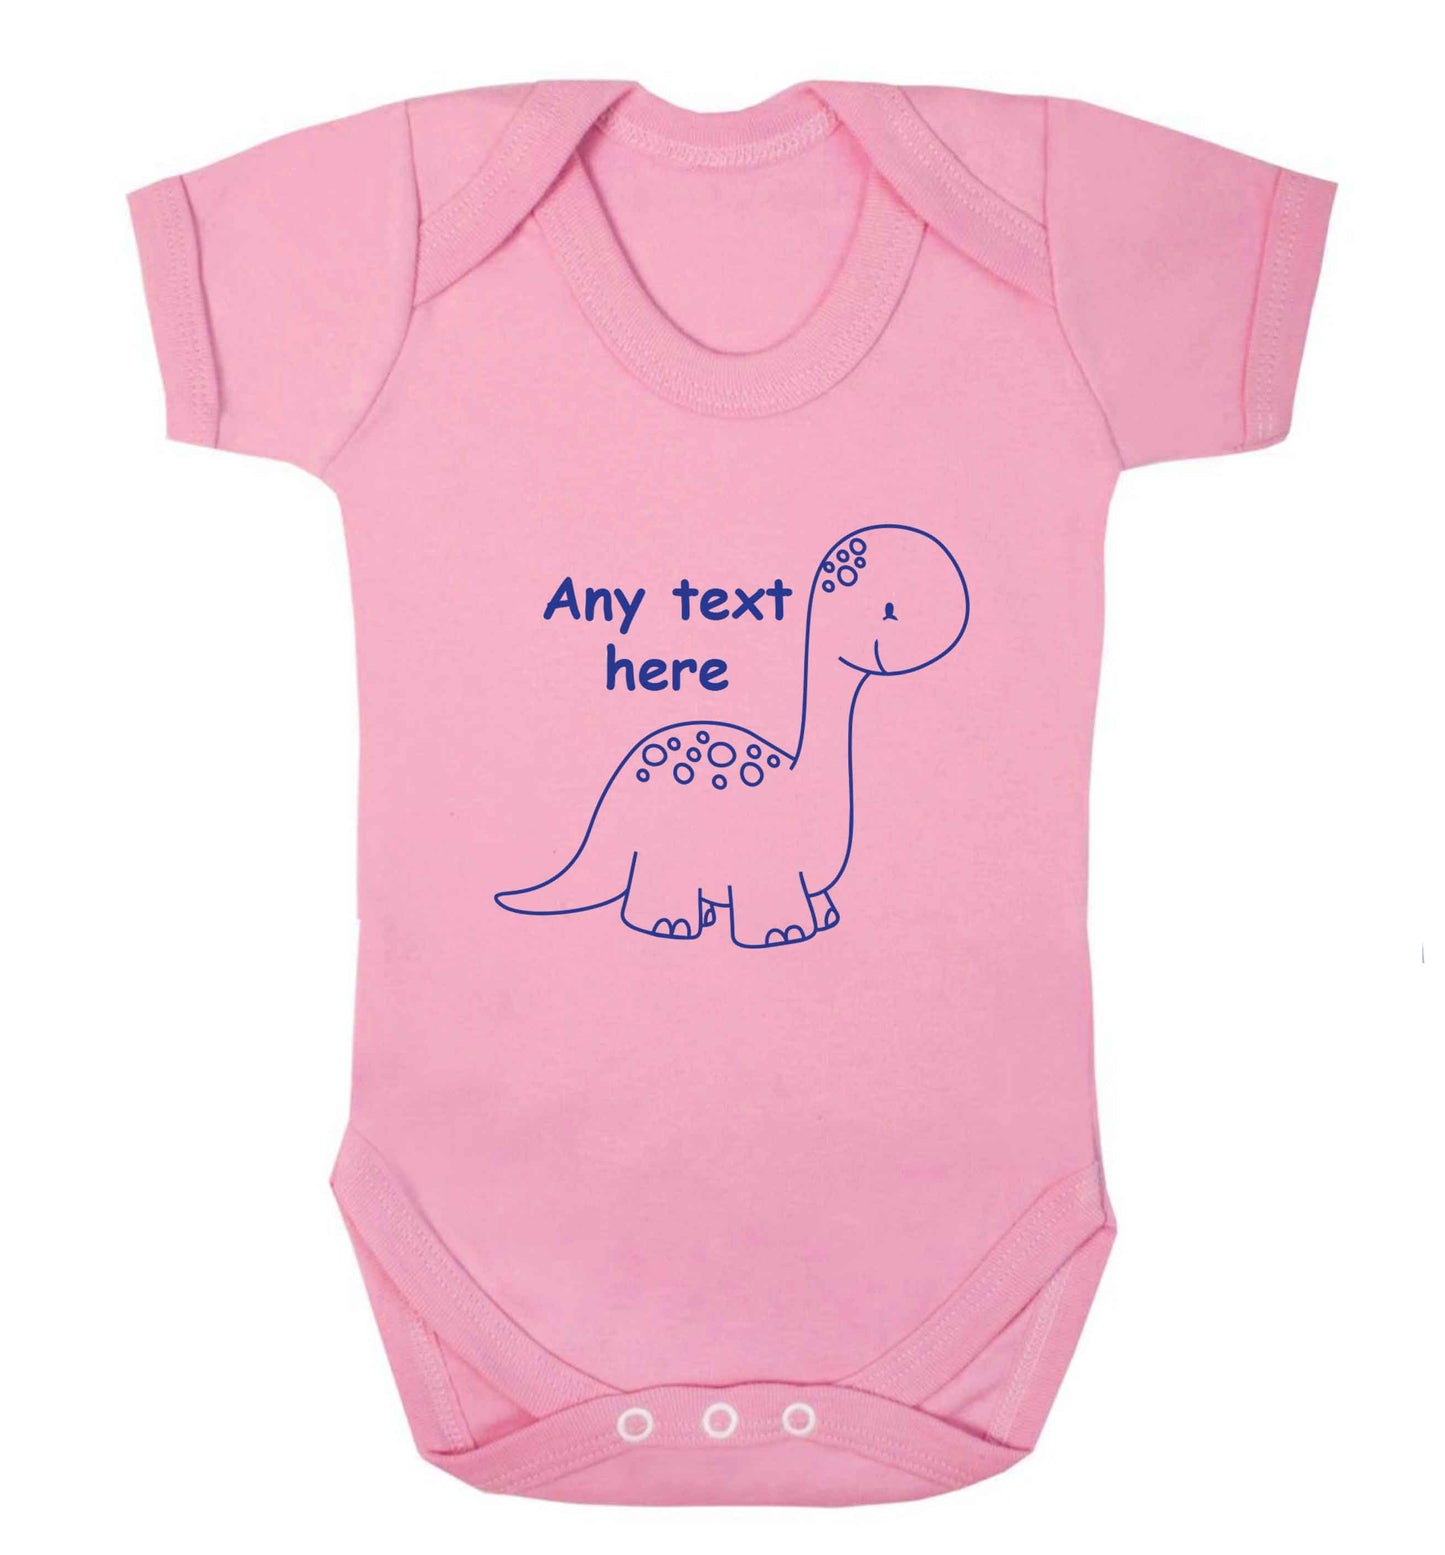 Dinosaur any text baby vest pale pink 18-24 months